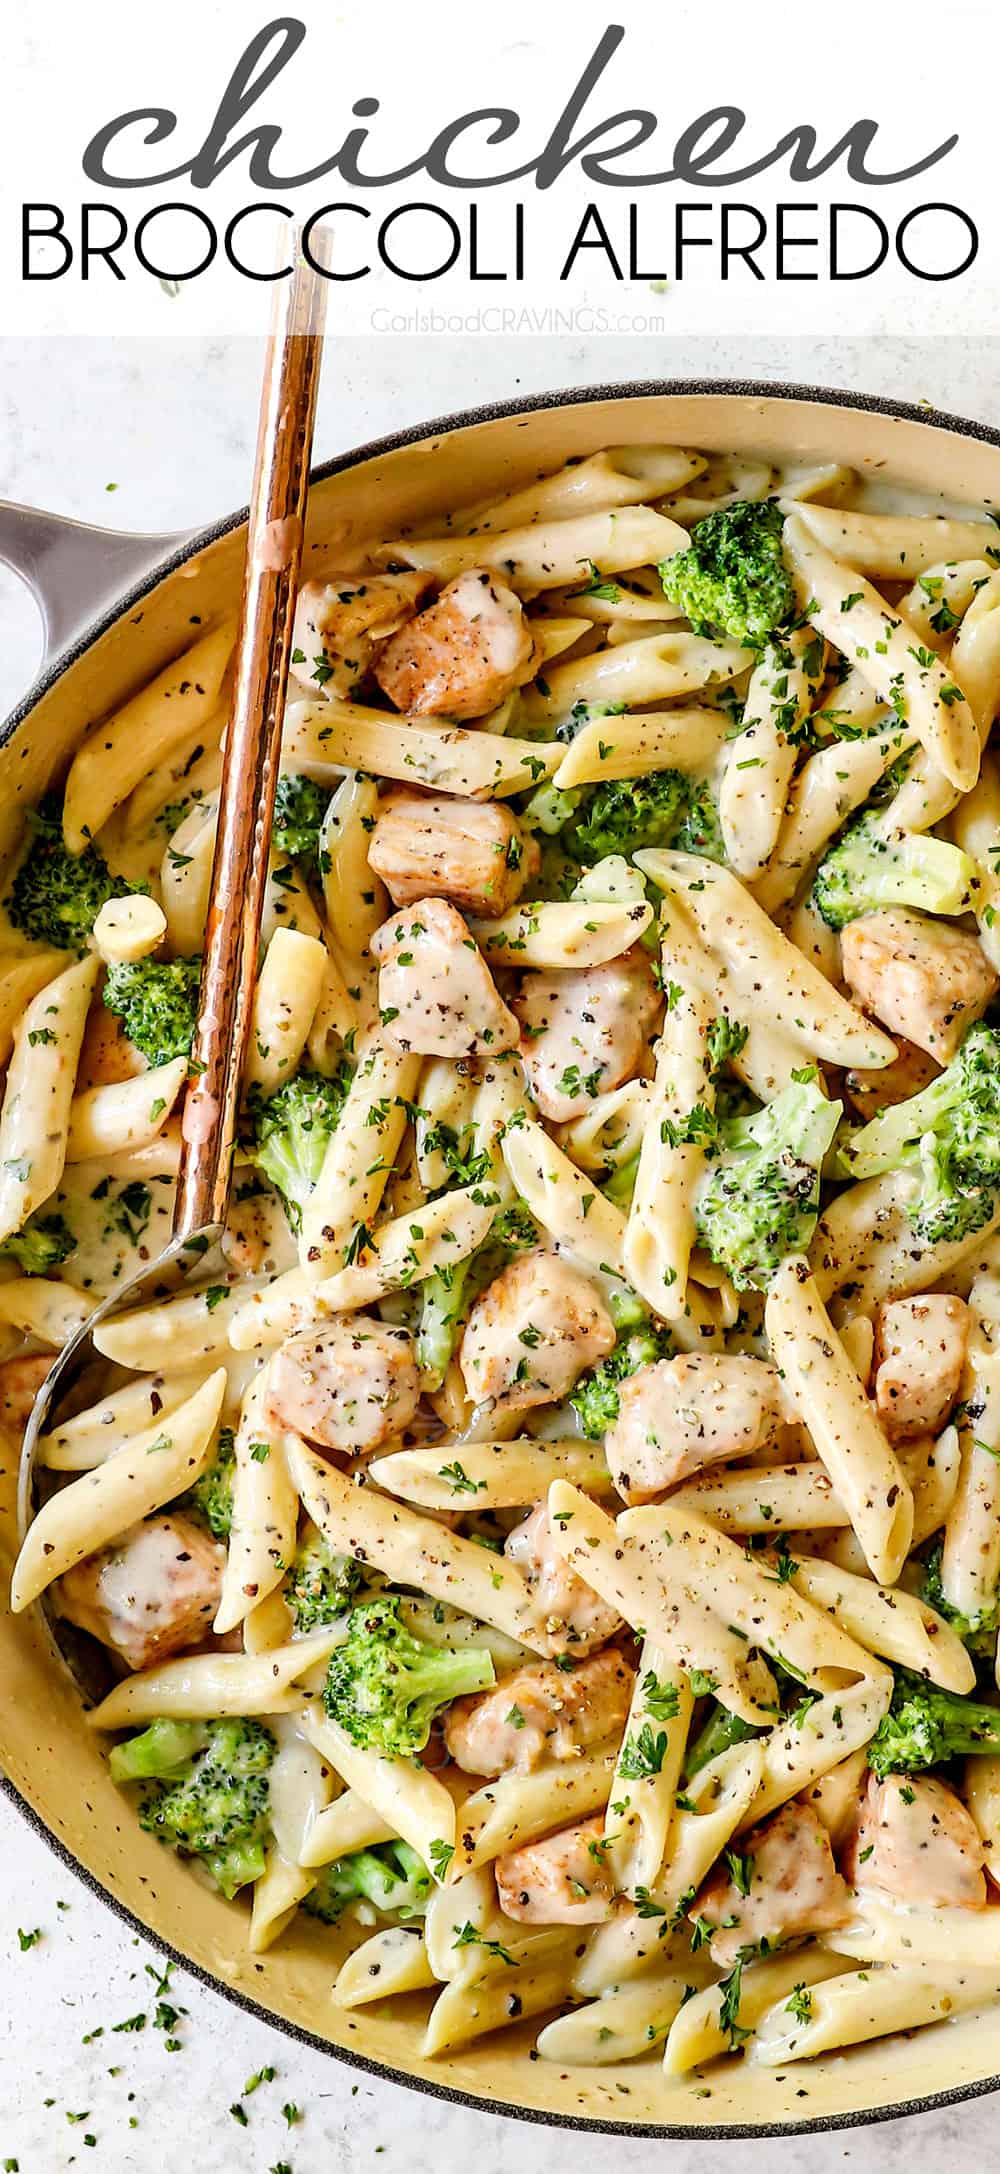 top view of chicken broccoli alfredo recipe in a pan showing how creamy the pasta is